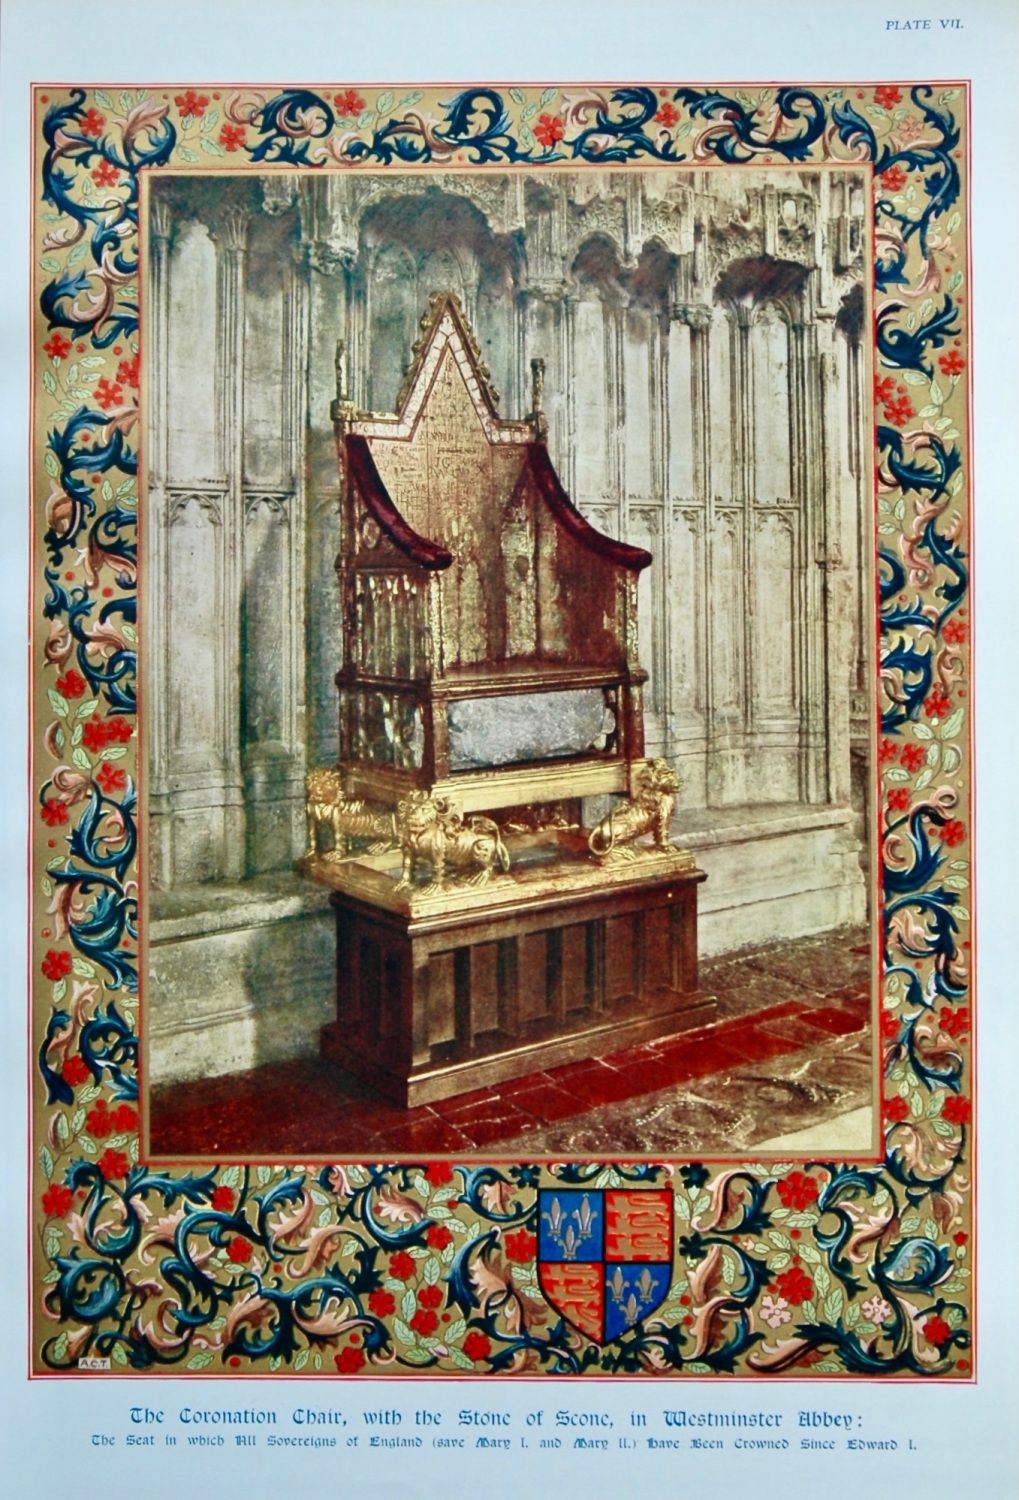 The Coronation Chair, with the Stone of Scone, in Westminster Abbey.